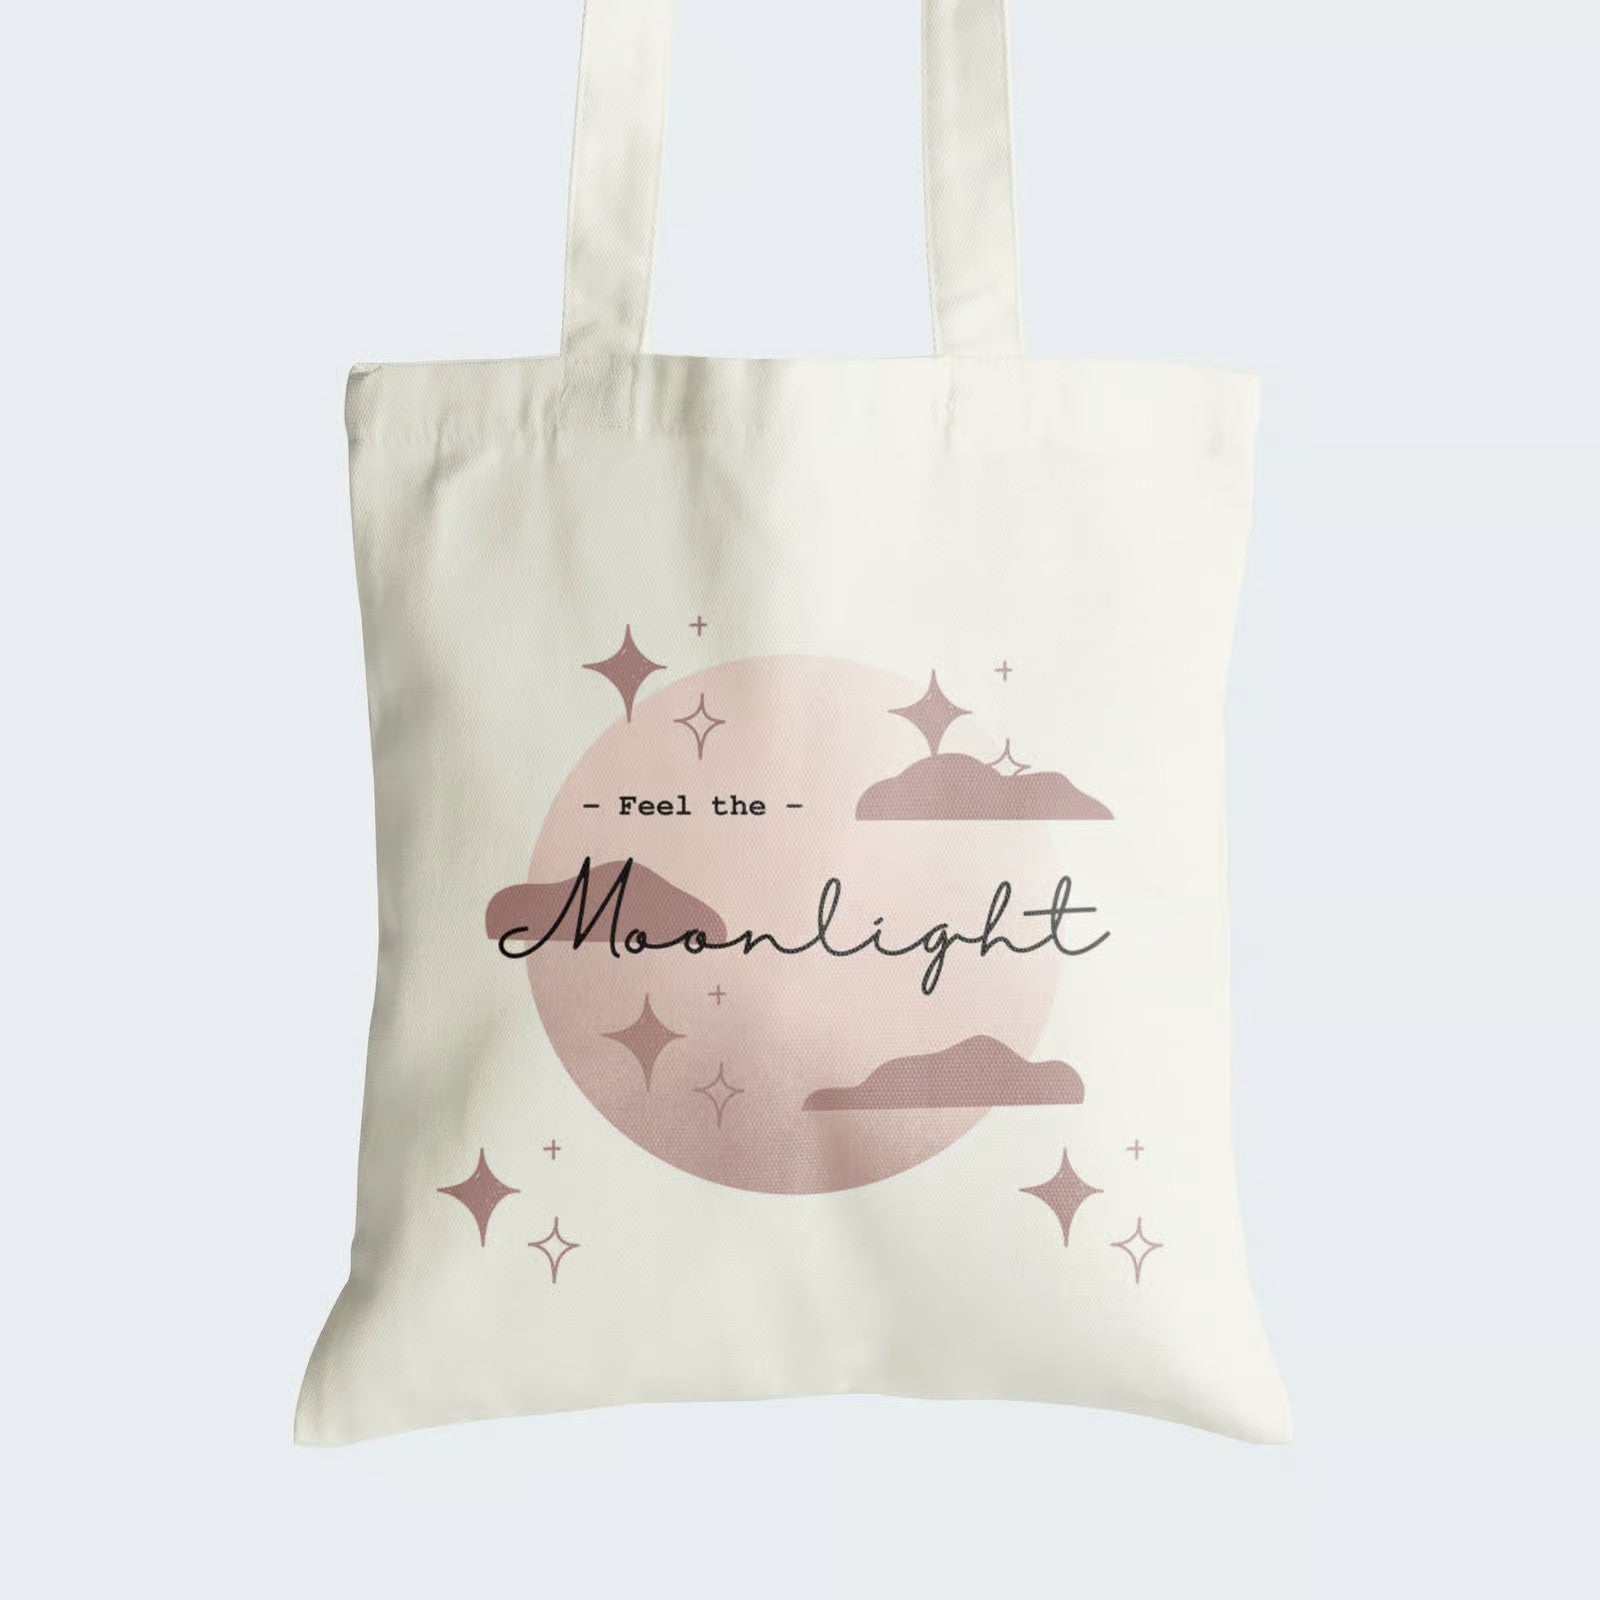 Elevate your style and embrace enchantment with our Cotton Canvas Tote Bag. Adorned with a captivating image of a full moon, glitter, and delicate clouds in a dark faded pink hue, accompanied by the empowering caption "Feel the Moonlight." Crafted for both durability and style, this tote features a secure zipper closure, making it ideal for daily use. Choose sustainability and carry a touch of celestial magic wherever you go!